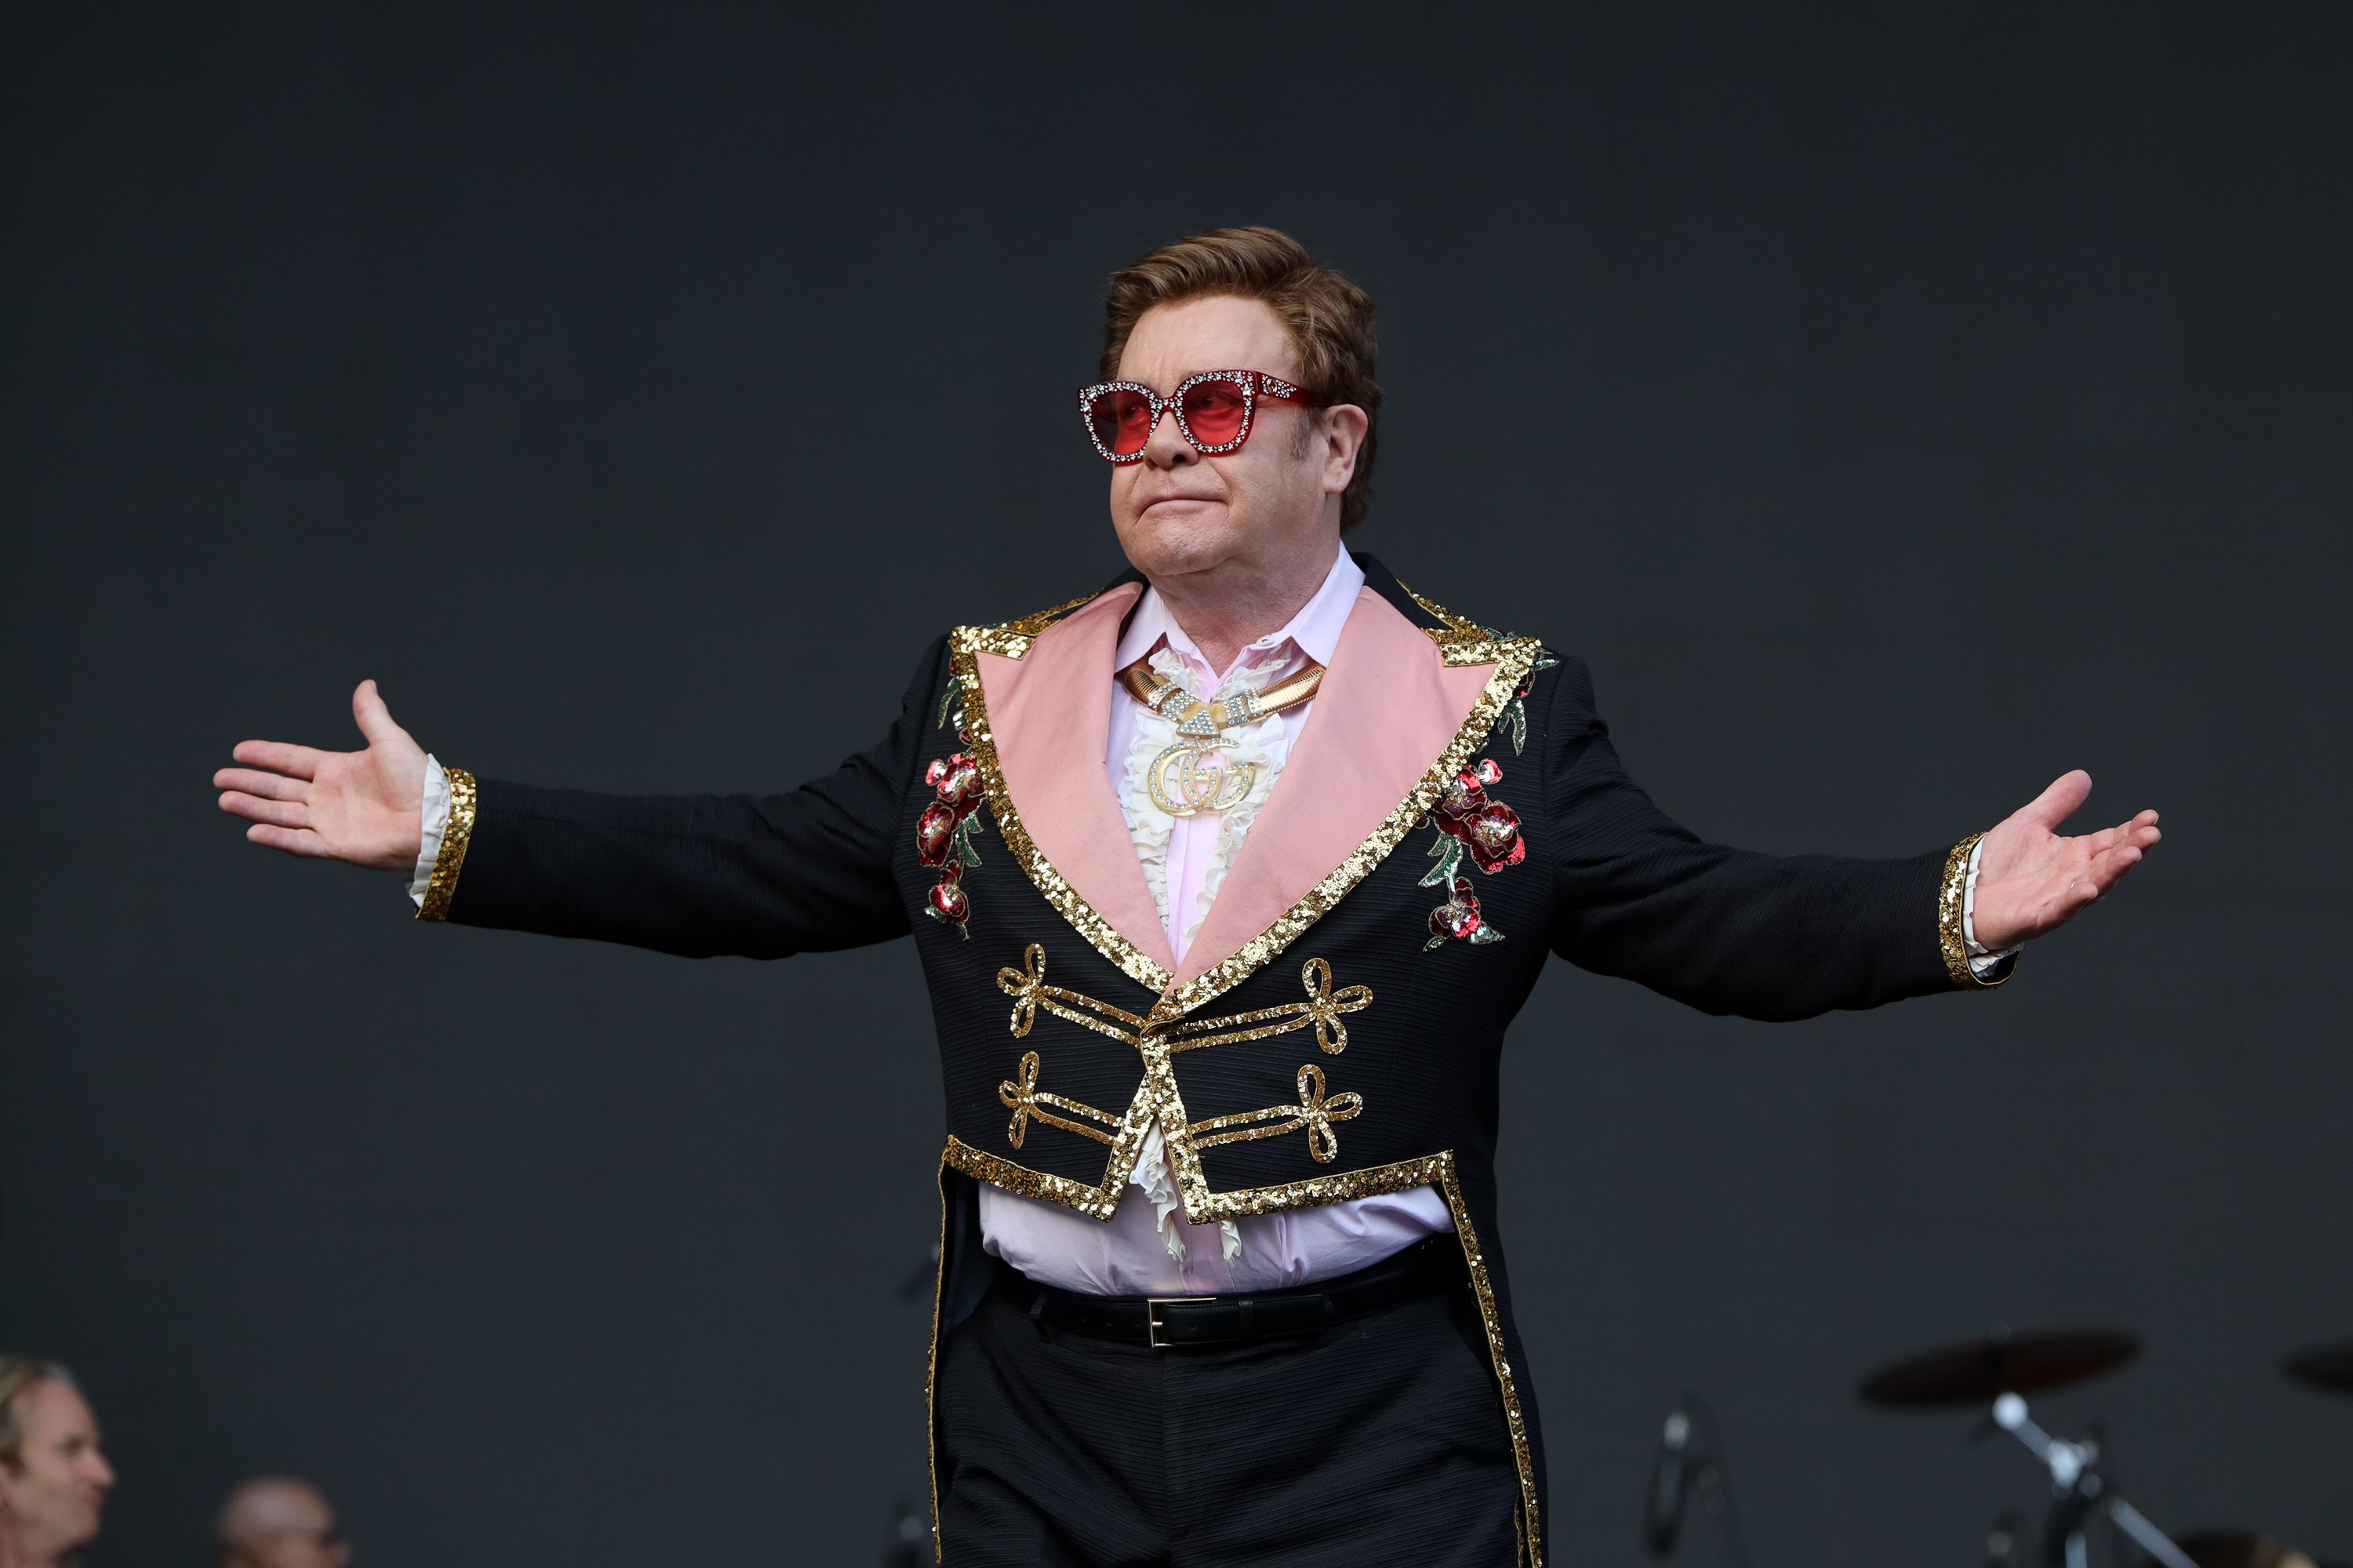 Sir Elton John apoligizing to this fans for cutting the show short at Mt Smart Stadium on February 16, 2020 in Auckland, New Zealand | Photo: Dave Simpson/WireImage